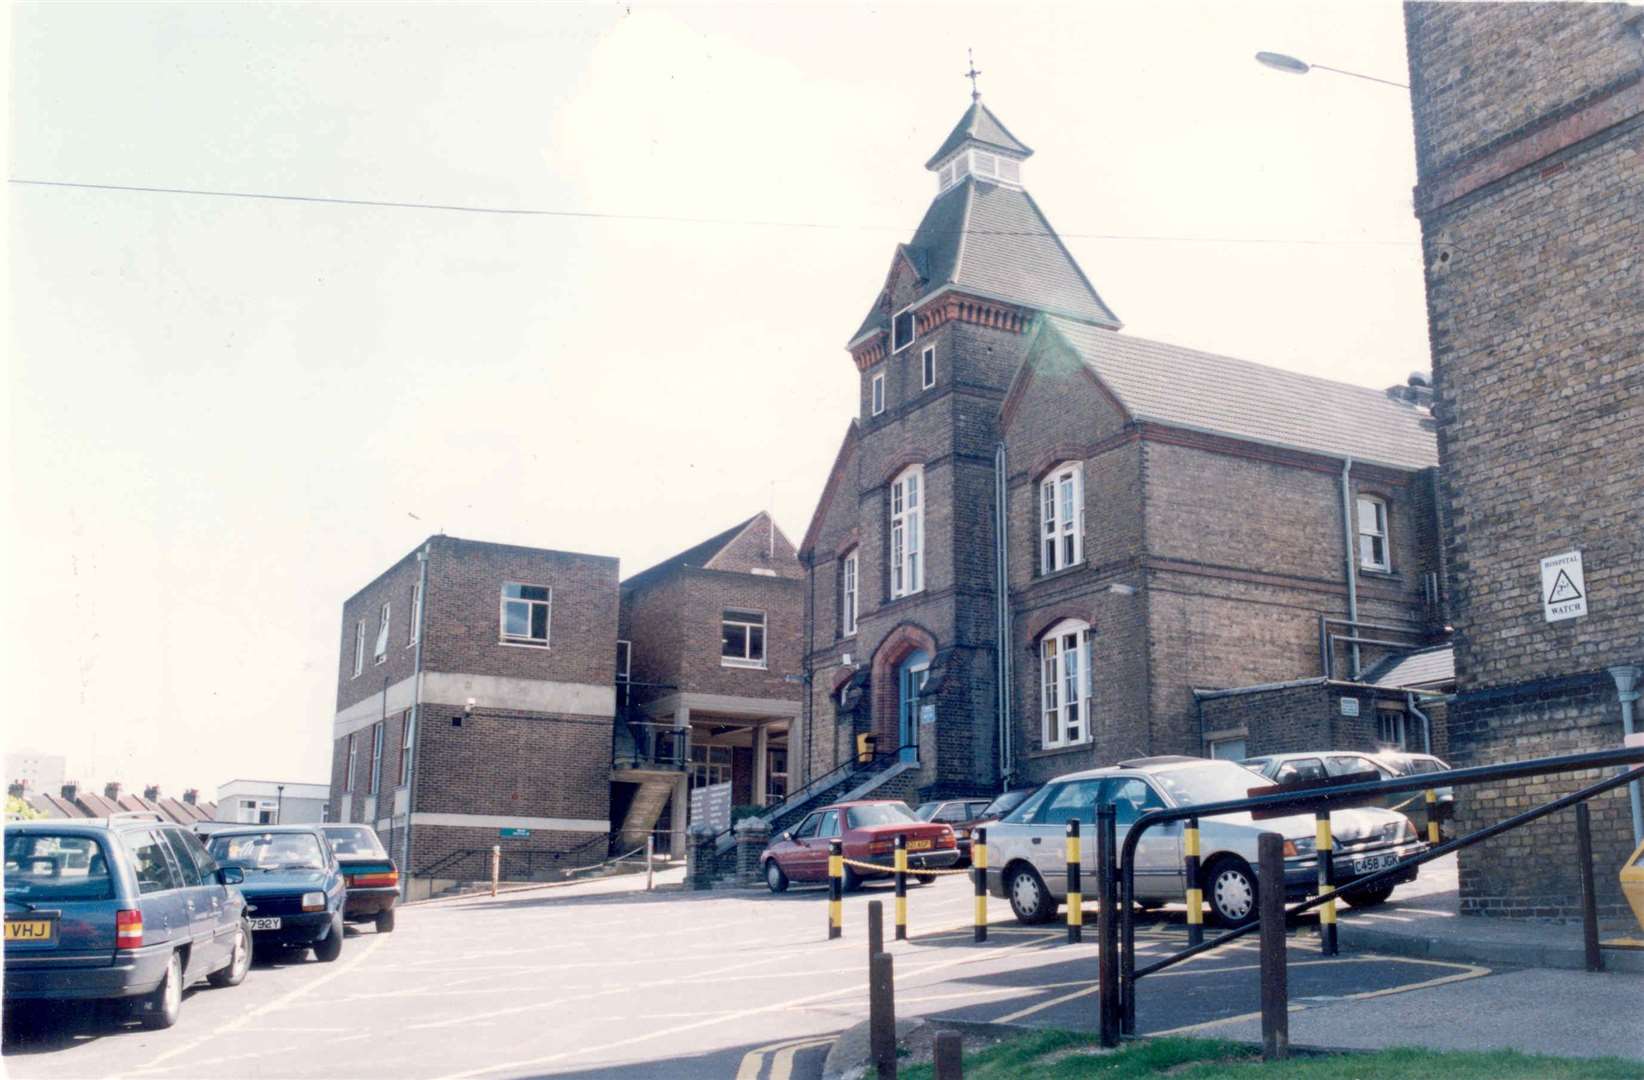 The former Chatham Workhouse became All Saint's Hospital in Magpie Hall Road, Chatham, pictured here in 1993. Picture: Images of Medway book